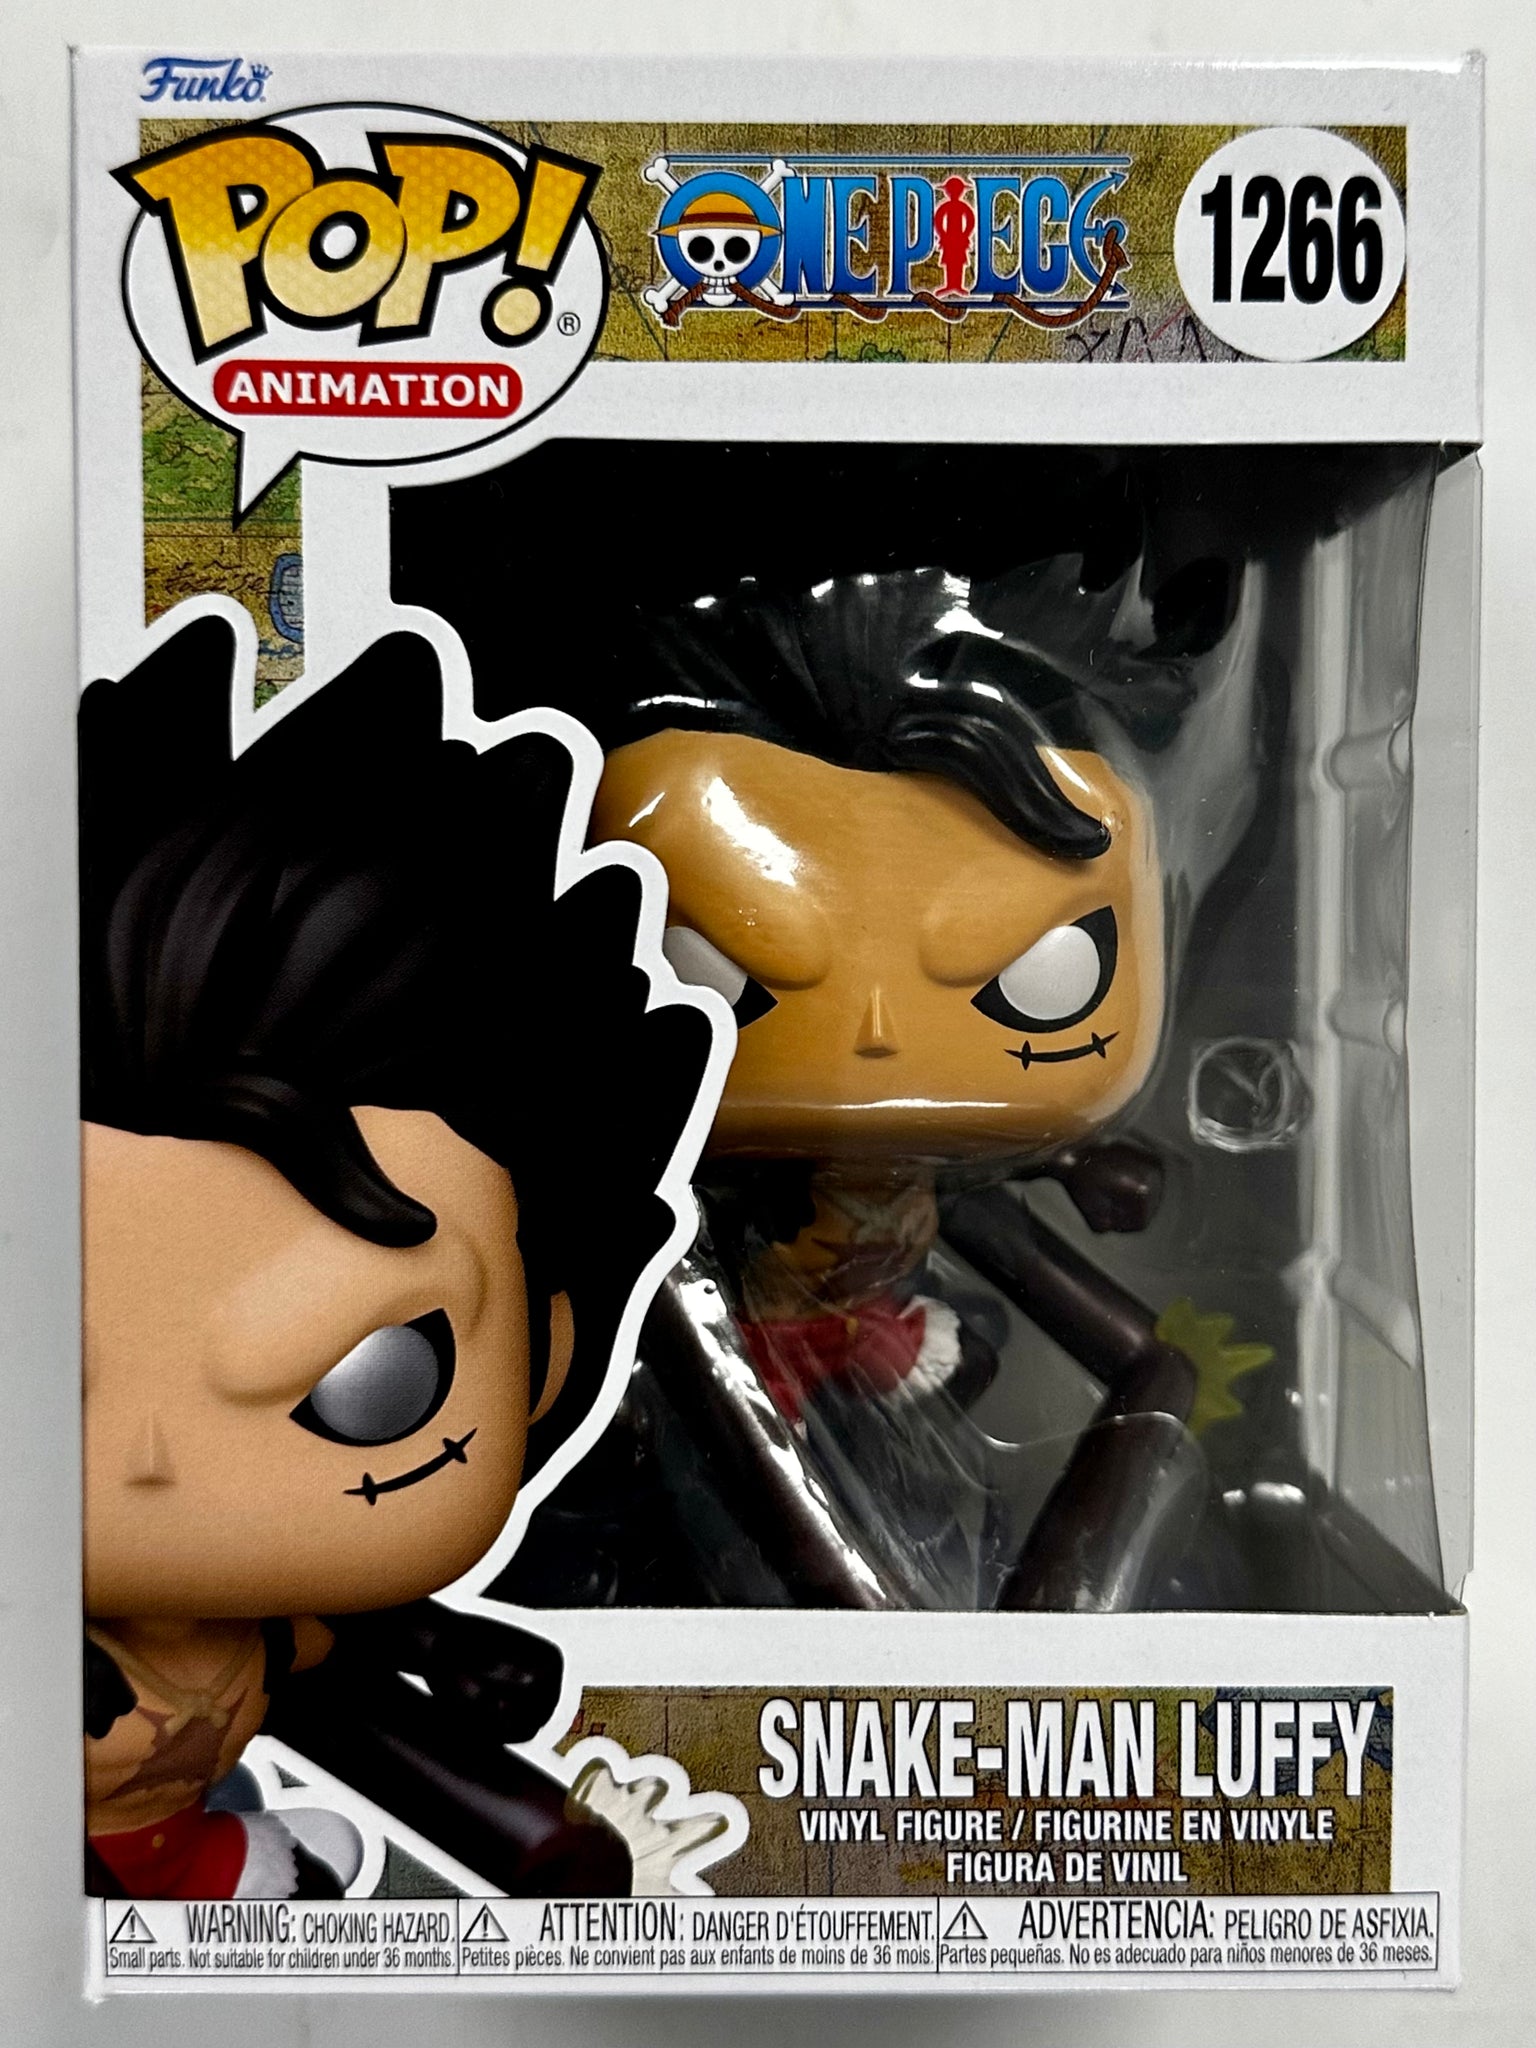 Buy Pop! Poster Monkey D. Luffy at Funko.